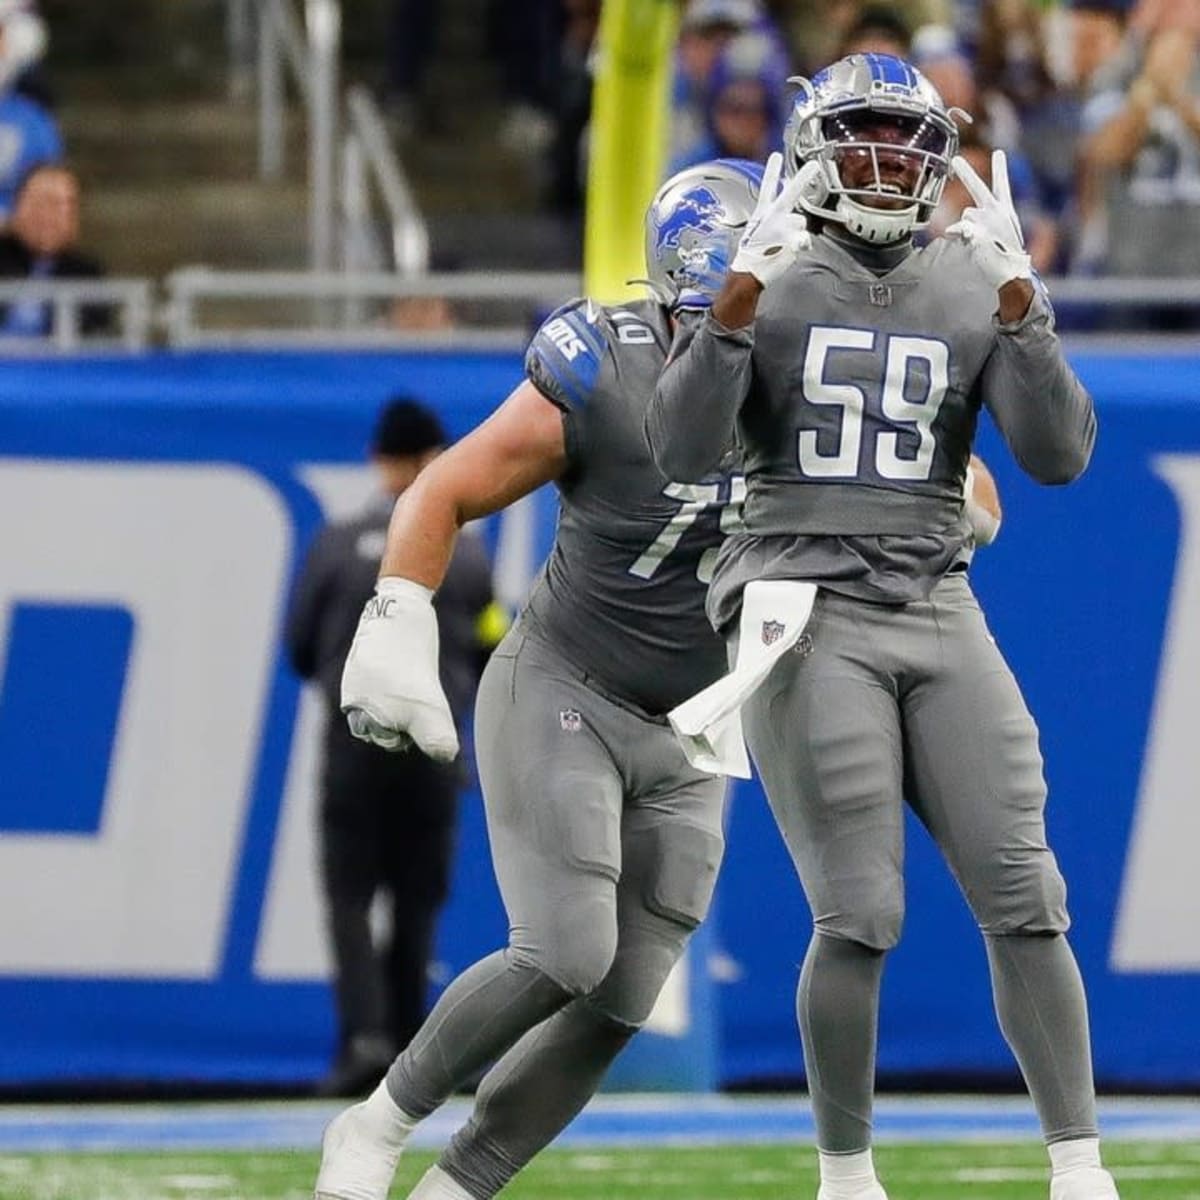 Detroit Lions Eligible for New Jerseys 2022 NFL Season - Sports Illustrated  Detroit Lions News, Analysis and More